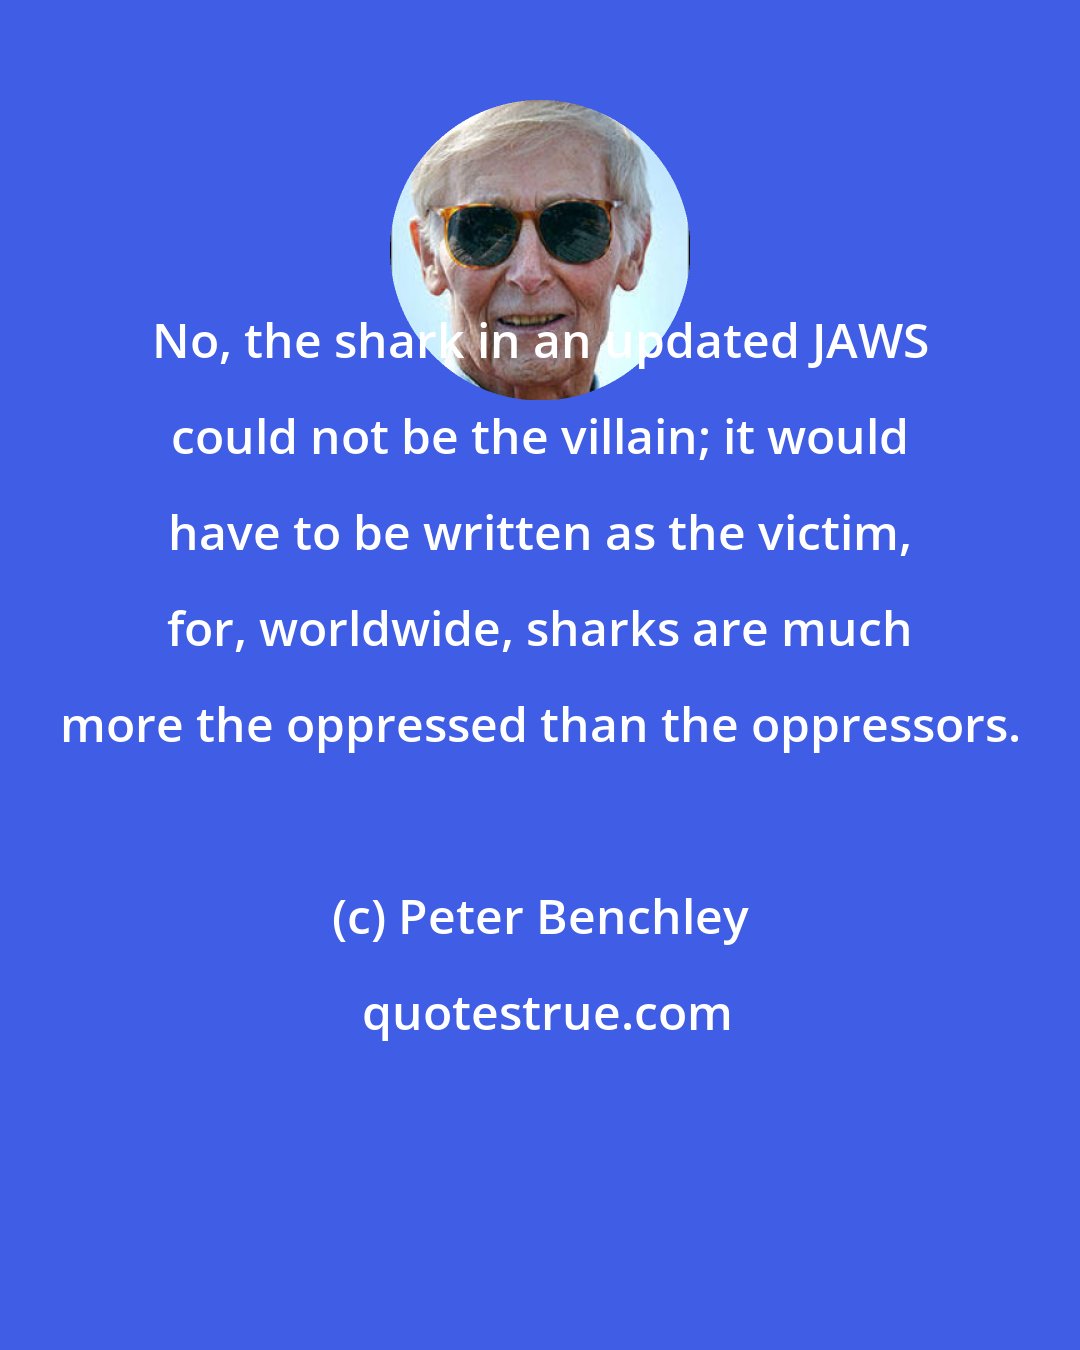 Peter Benchley: No, the shark in an updated JAWS could not be the villain; it would have to be written as the victim, for, worldwide, sharks are much more the oppressed than the oppressors.